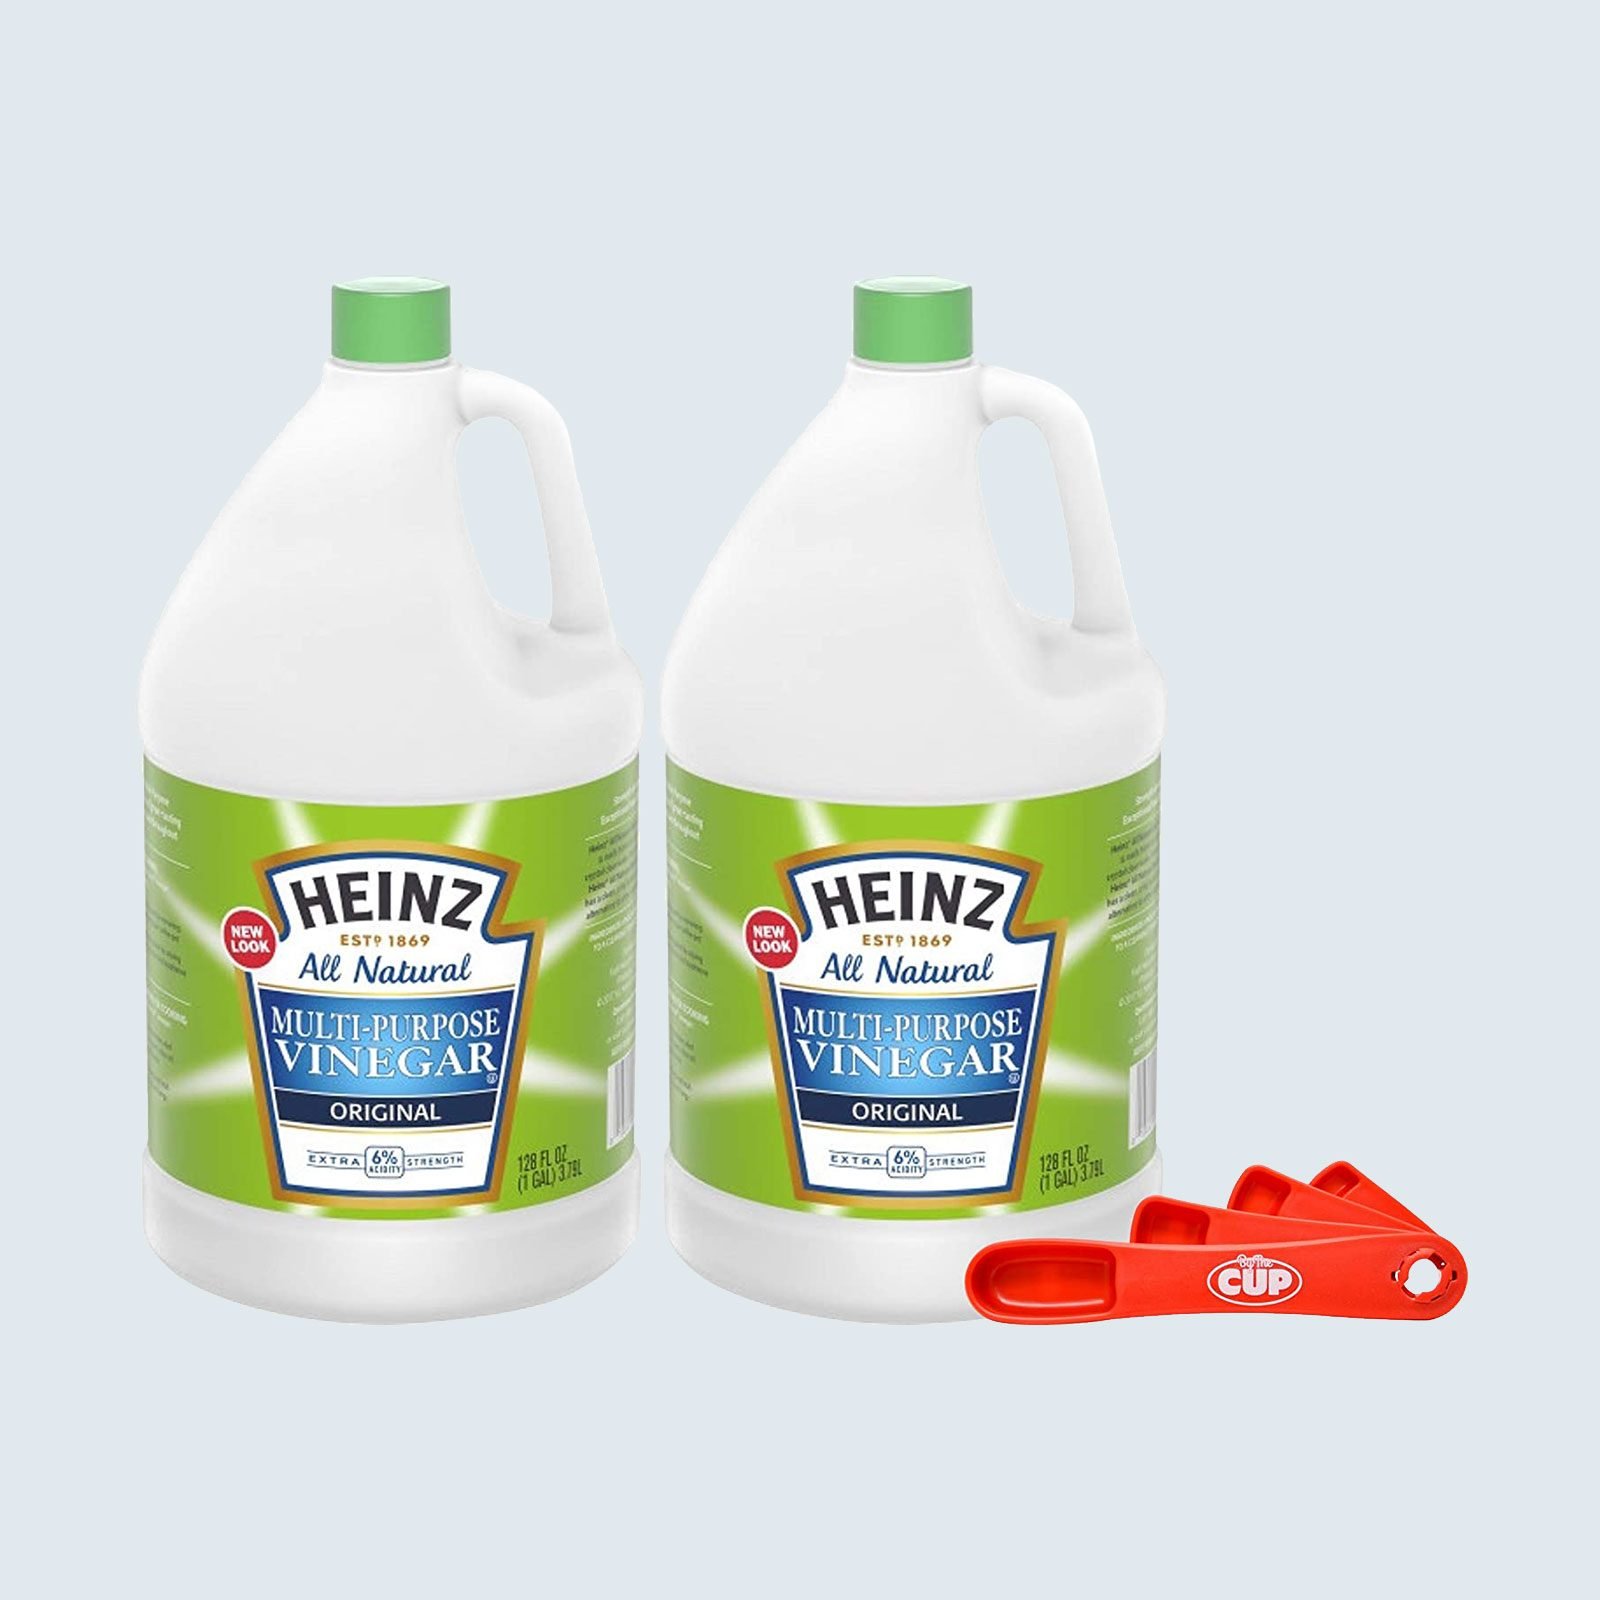 Cleaning Products Professional House Cleaners Love